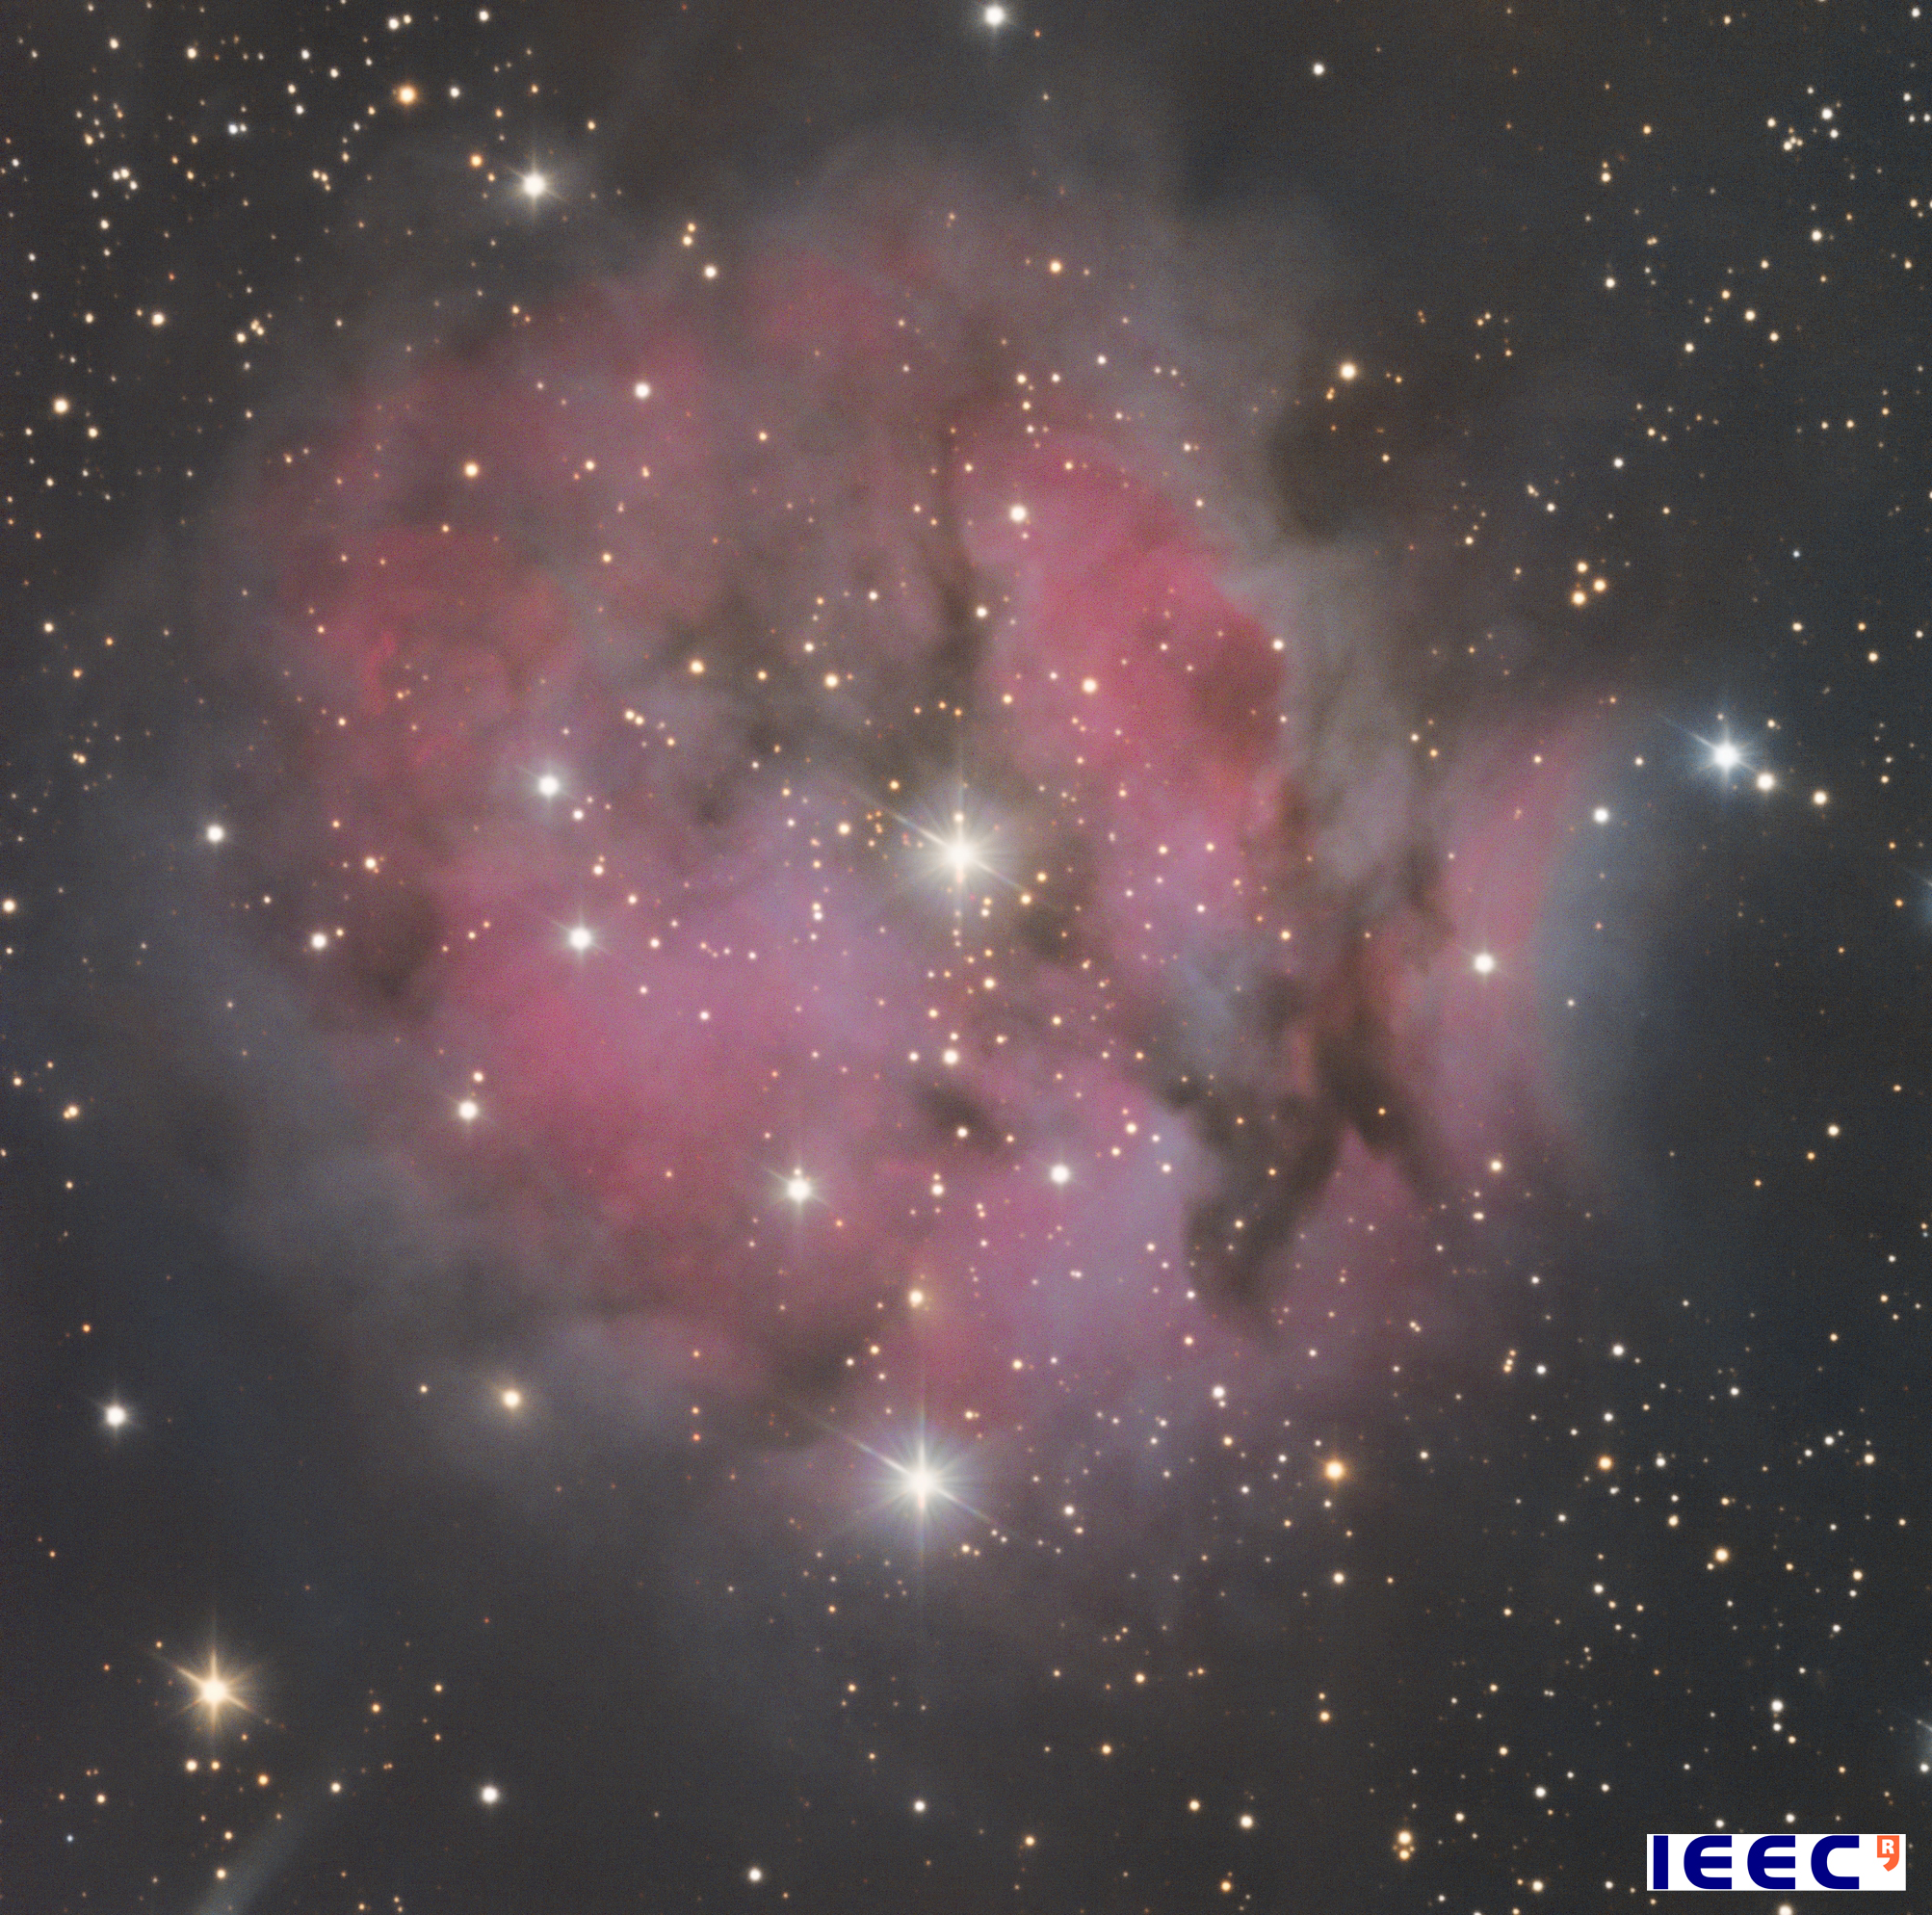 The IC5146 Nebula, picture of August of the Montsec Astronomical Observatory